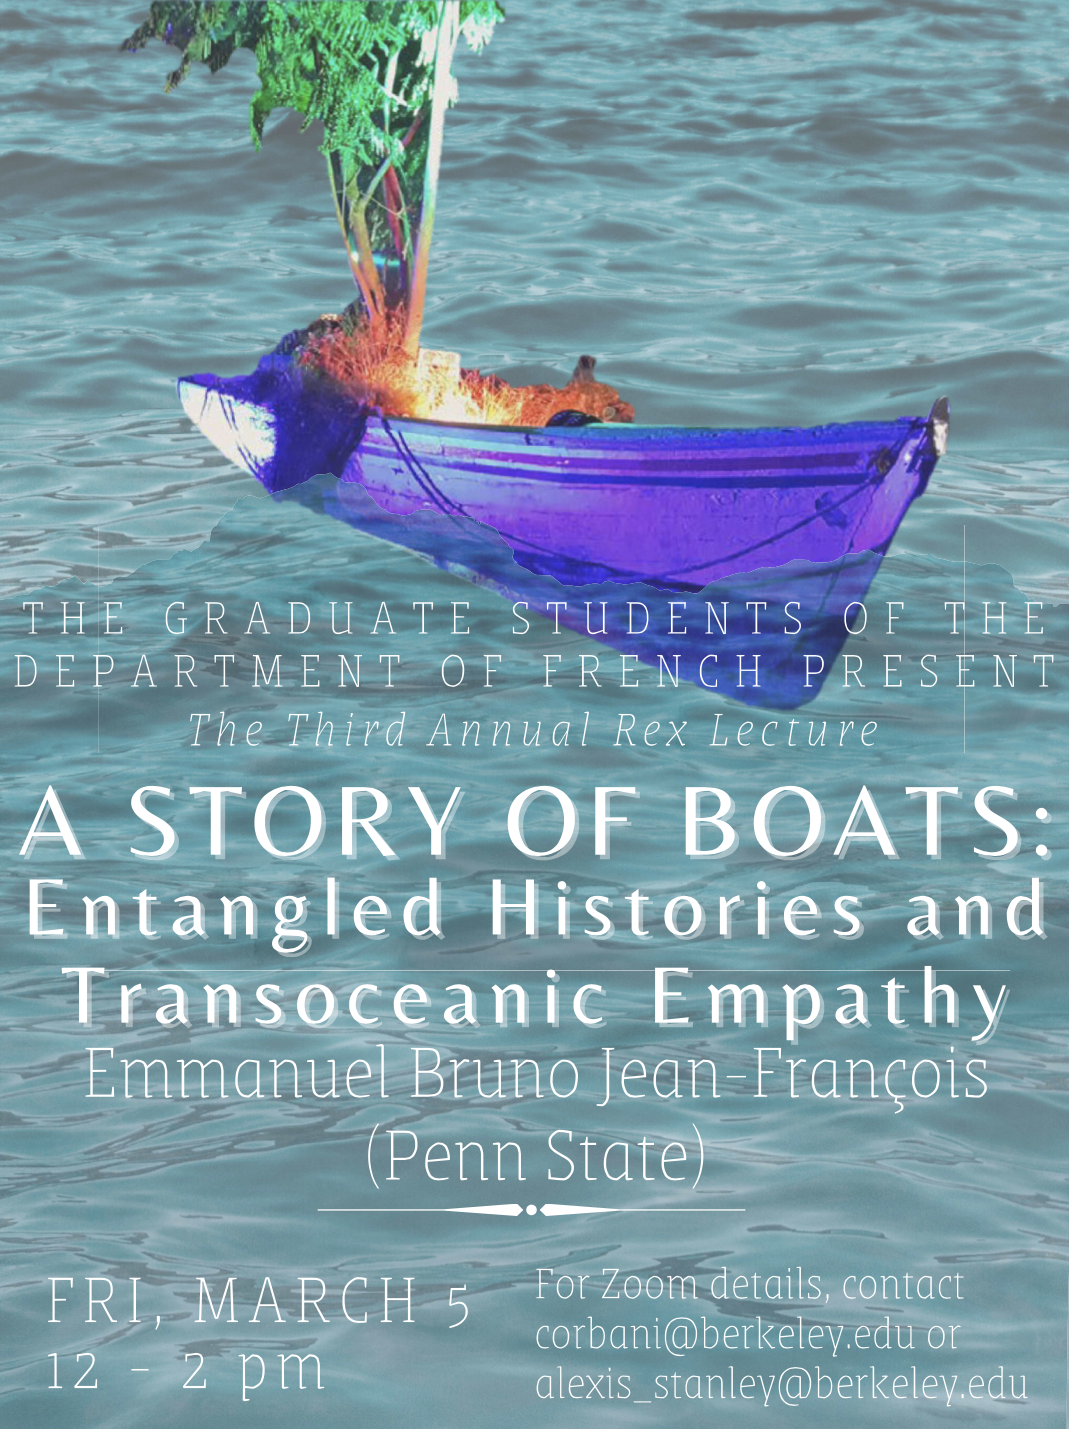 Rex Lecture by Emmanuel Bruno Jean-François (Penn State): "A Story of Entangled Histories and Transoceanic Empathy"